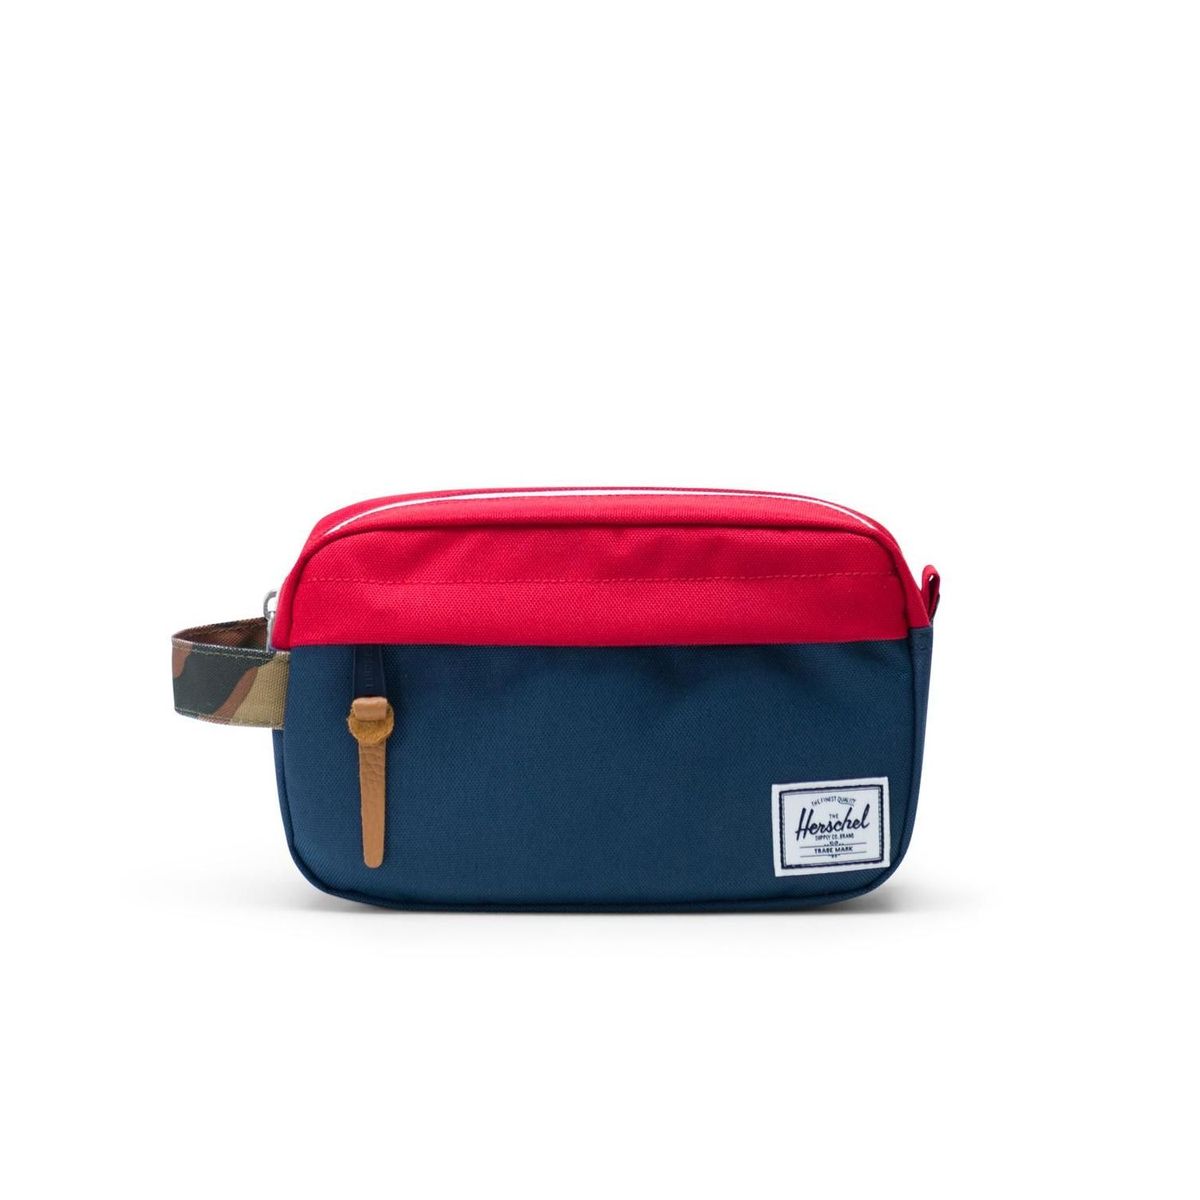 Herschel Classic Chapter Carry On Pouch Navy/Red/Woodland Camo